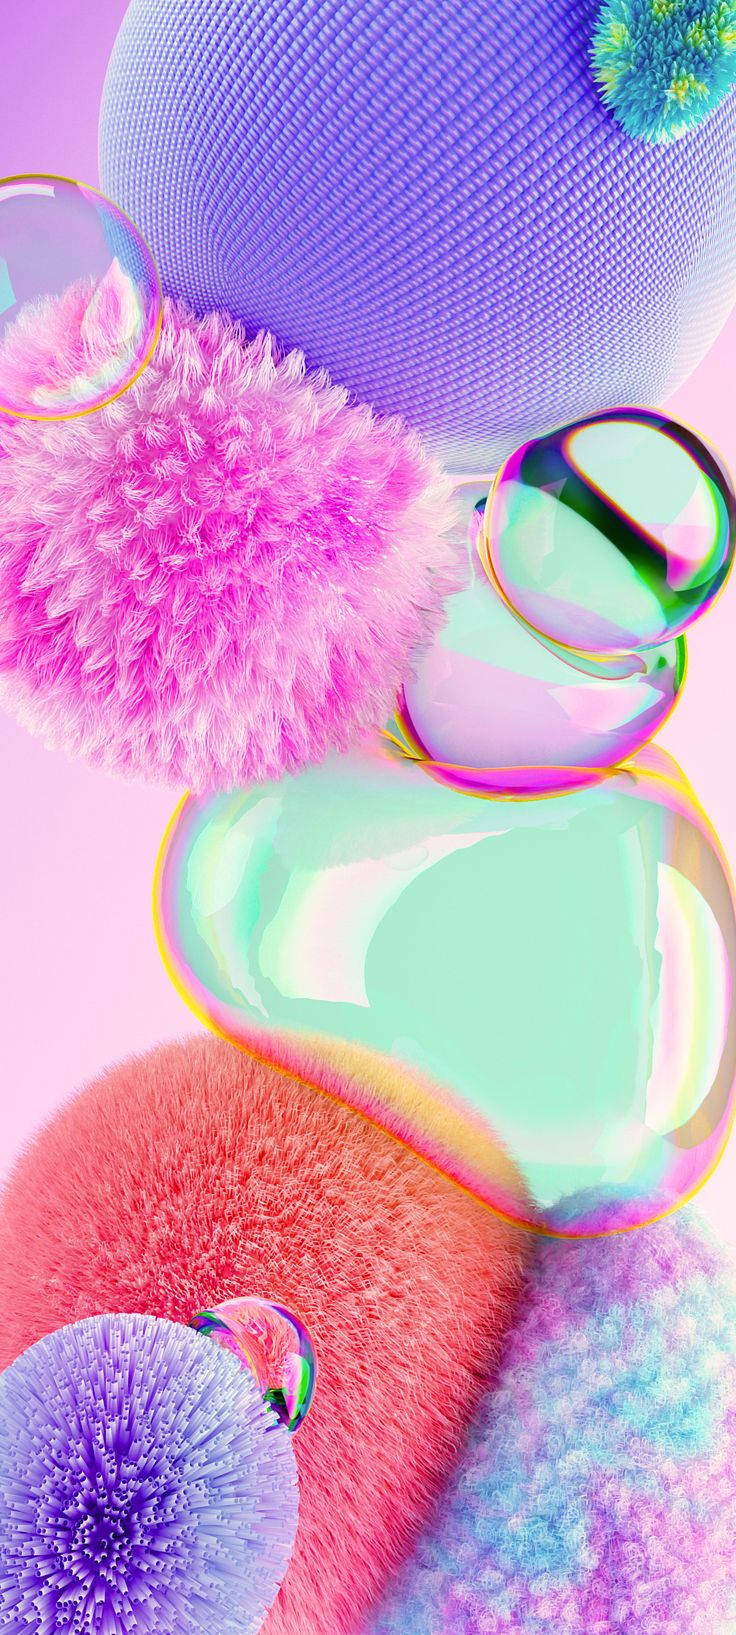 Fluffy Balls And Bubbles Mobile 3d Wallpaper